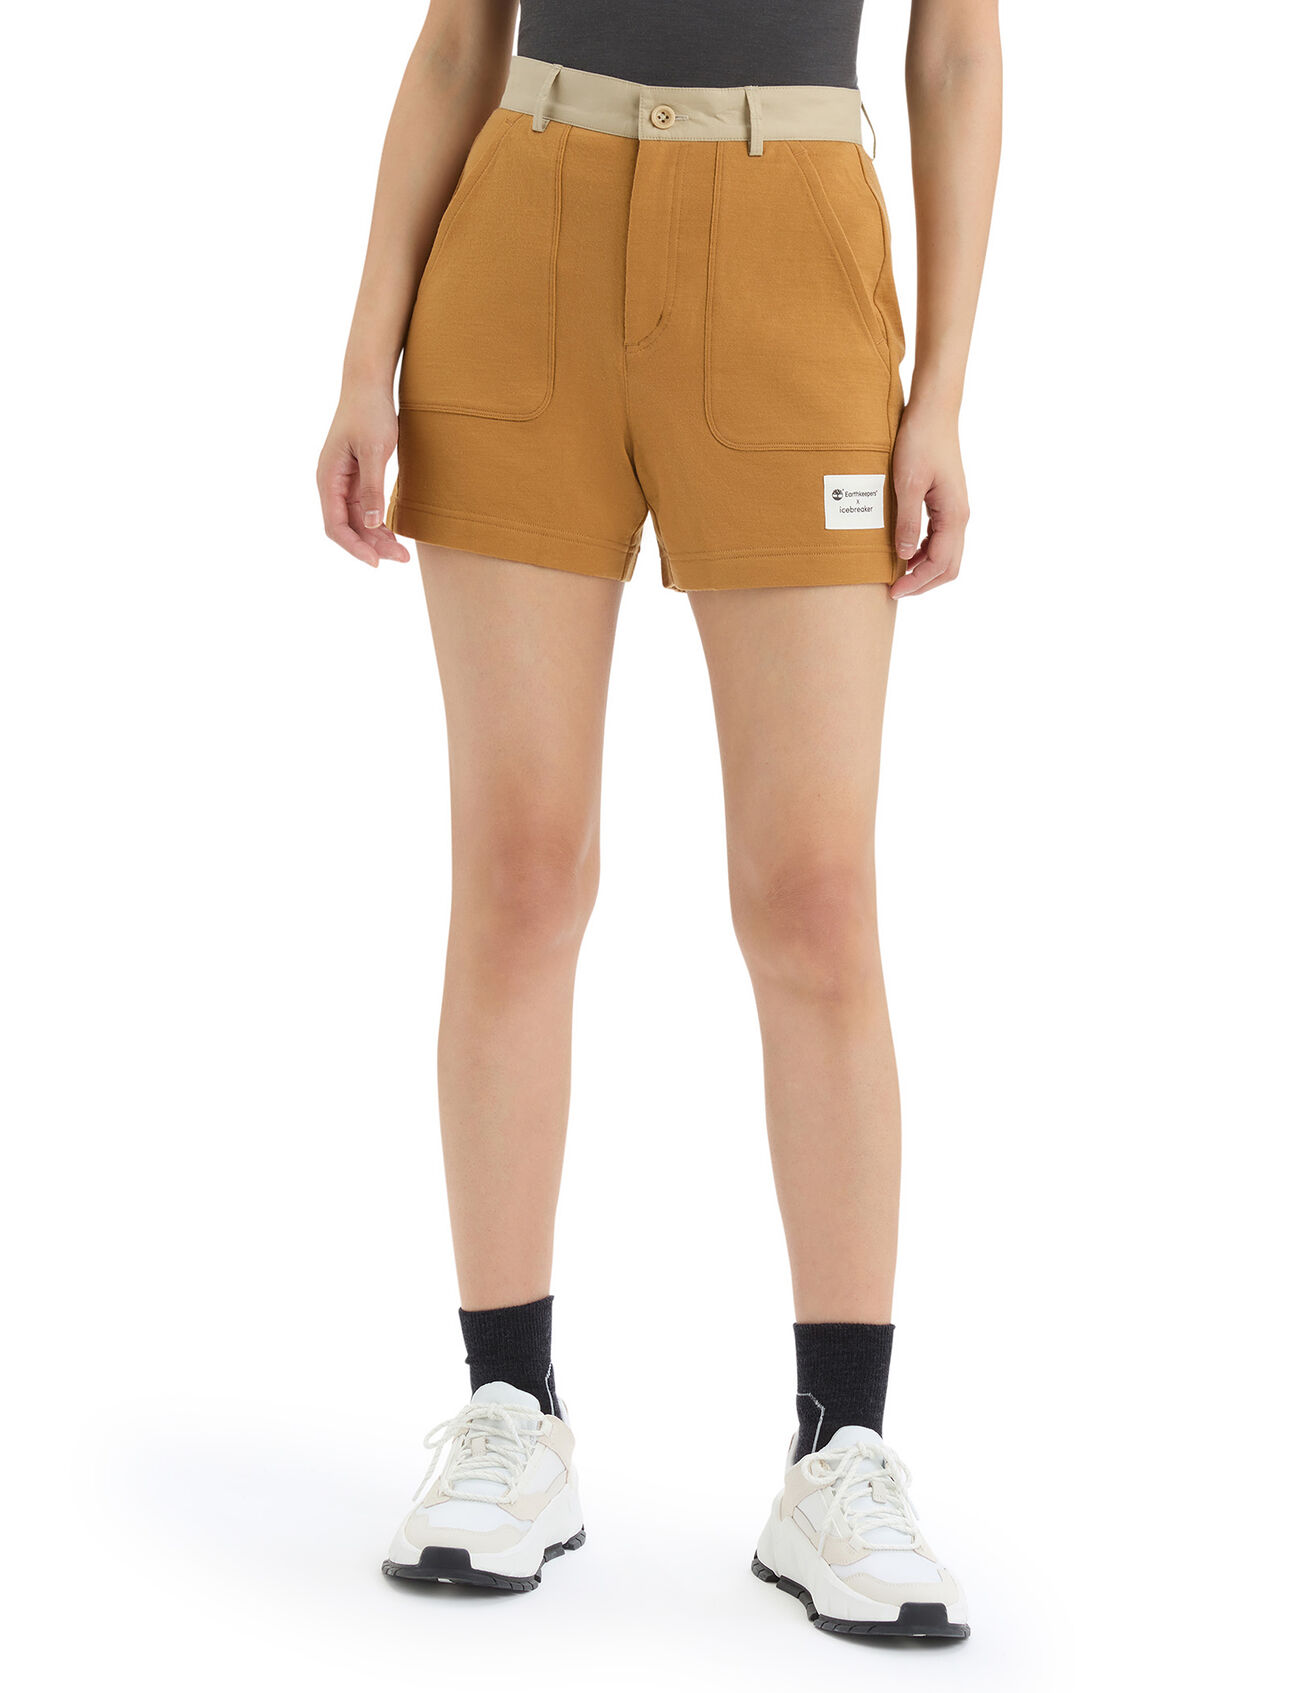 Womens Timberland x icebreaker Merino Terry Chino Shorts Designed in collaboration with Timberland, the Timberland x icebreaker Merino Terry Chino Shorts offer up classic workwear styling with an ultra-soft merino terry fabric.